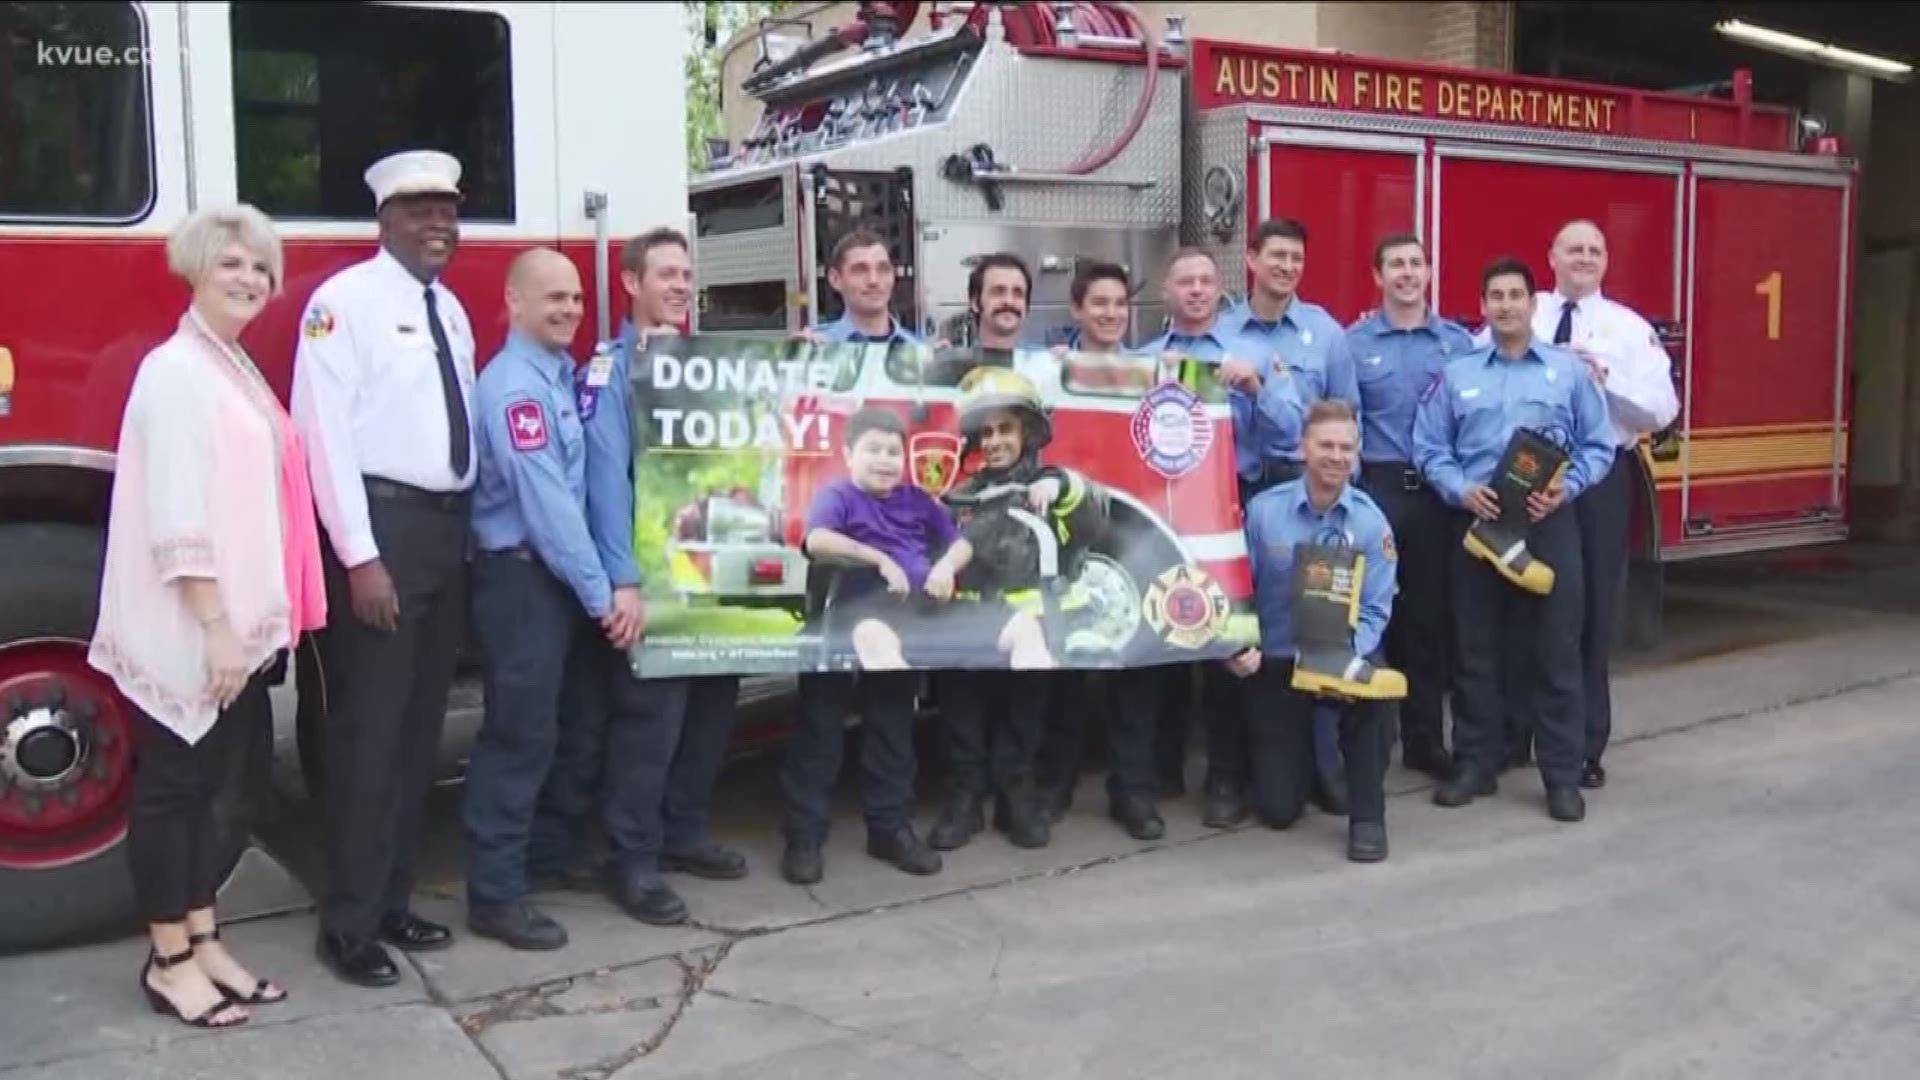 Friday, the Austin Fire Department kicked off their "Fill the Boot" campaign, which will run through Sunday.